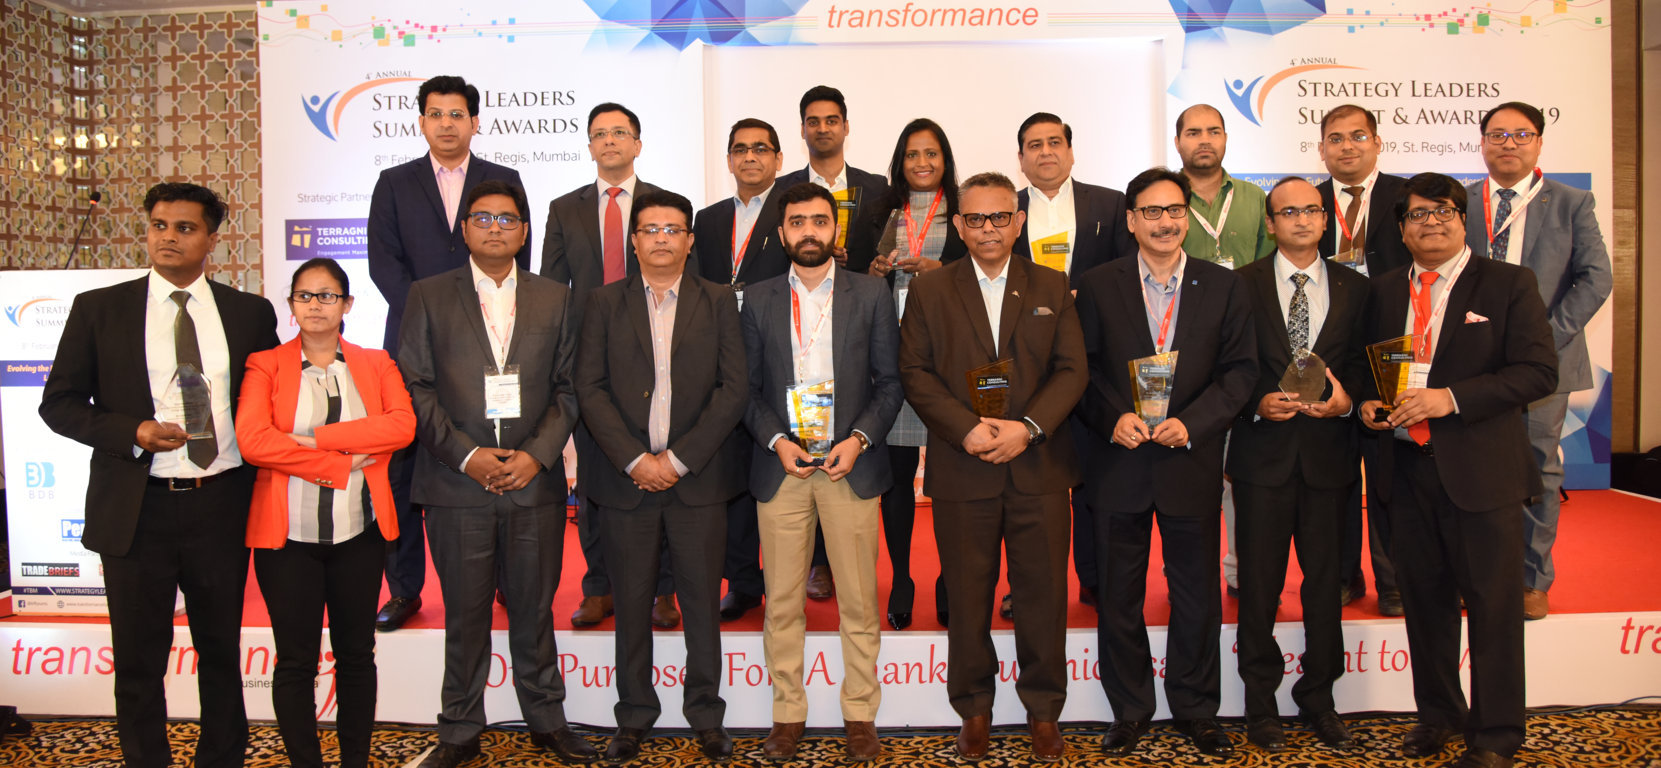 4th Annual Strategy Leaders Summit & Awards 2019